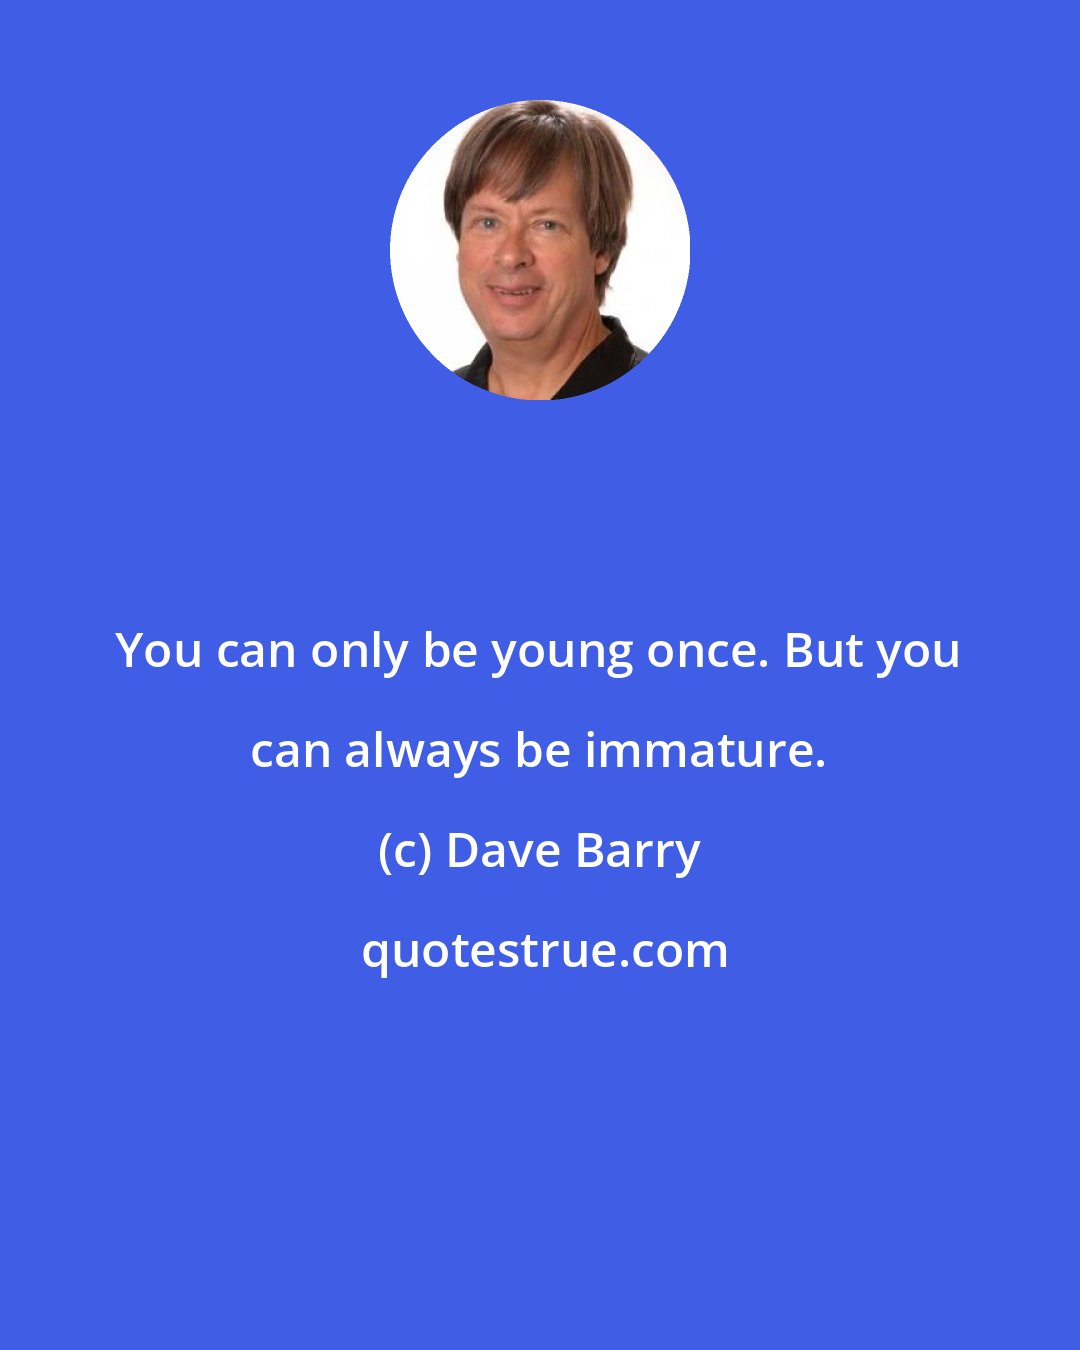 Dave Barry: You can only be young once. But you can always be immature.